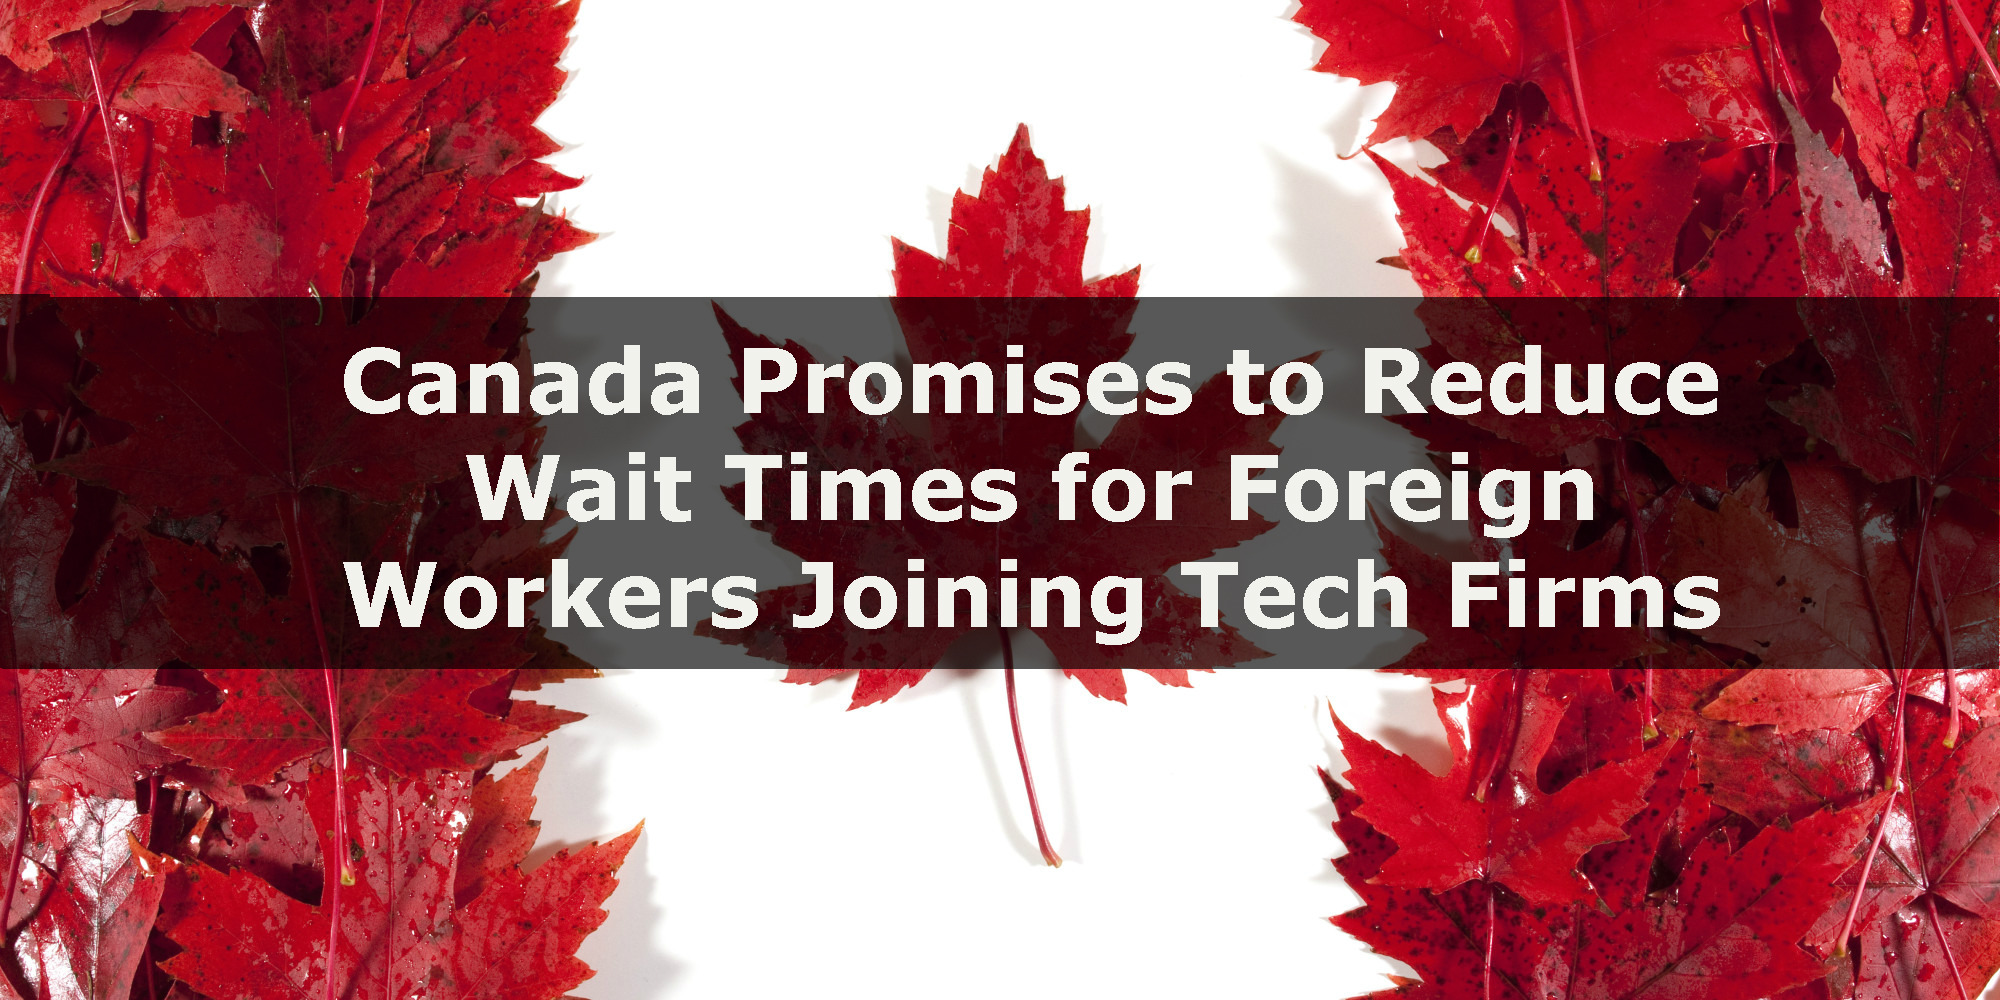 Canadian Immigration: Ottawa Vows to Cut Wait Times for Foreign Workers Joining Tech Firms